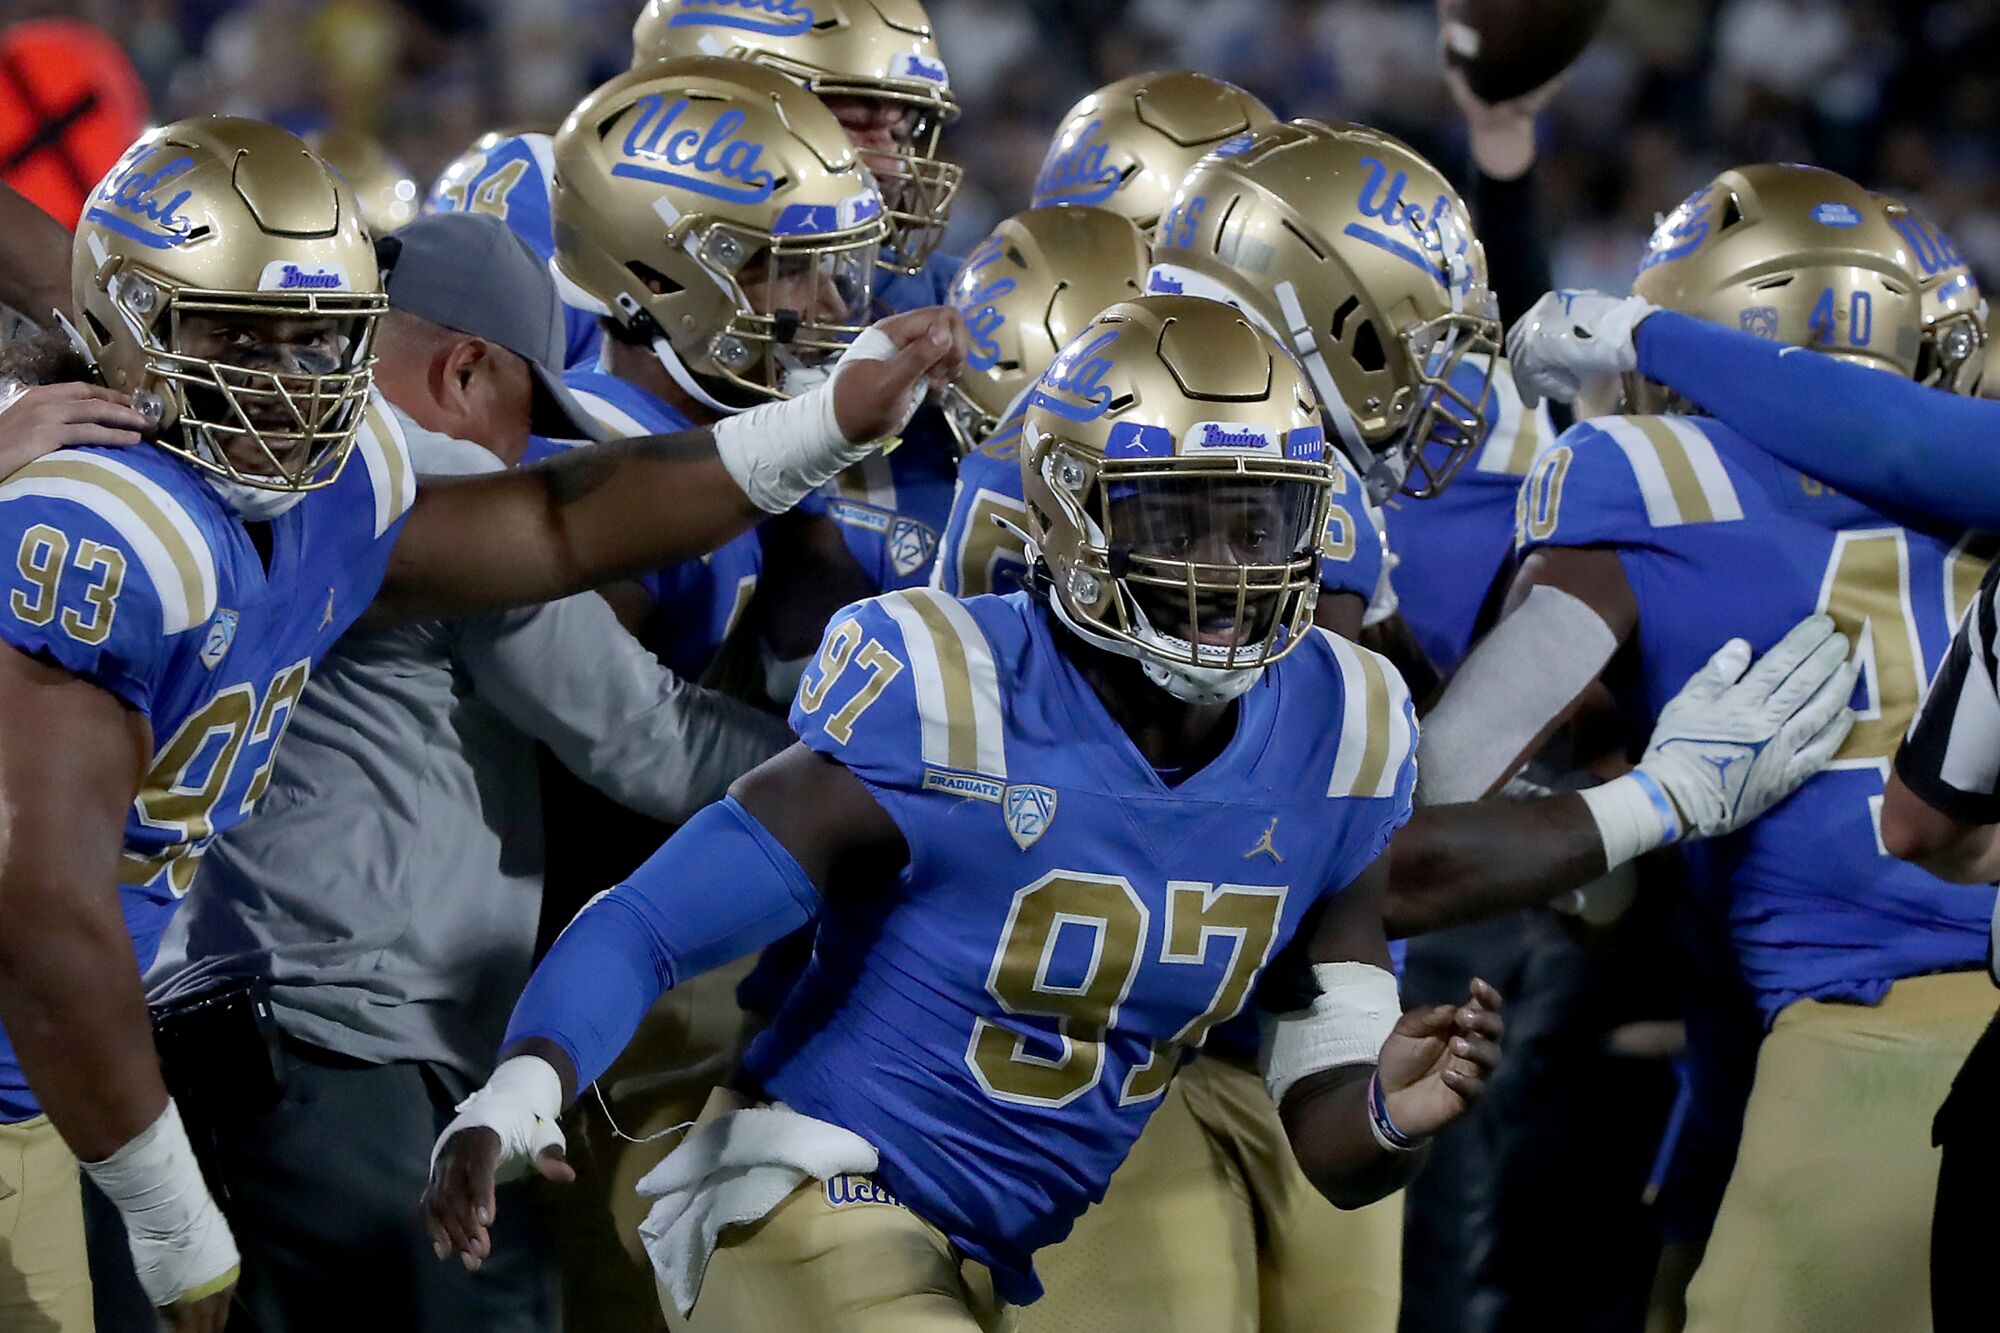 UCLA players celebrate after forcing a turnover against LSU at the Rose Bowl on Sept. 4. 